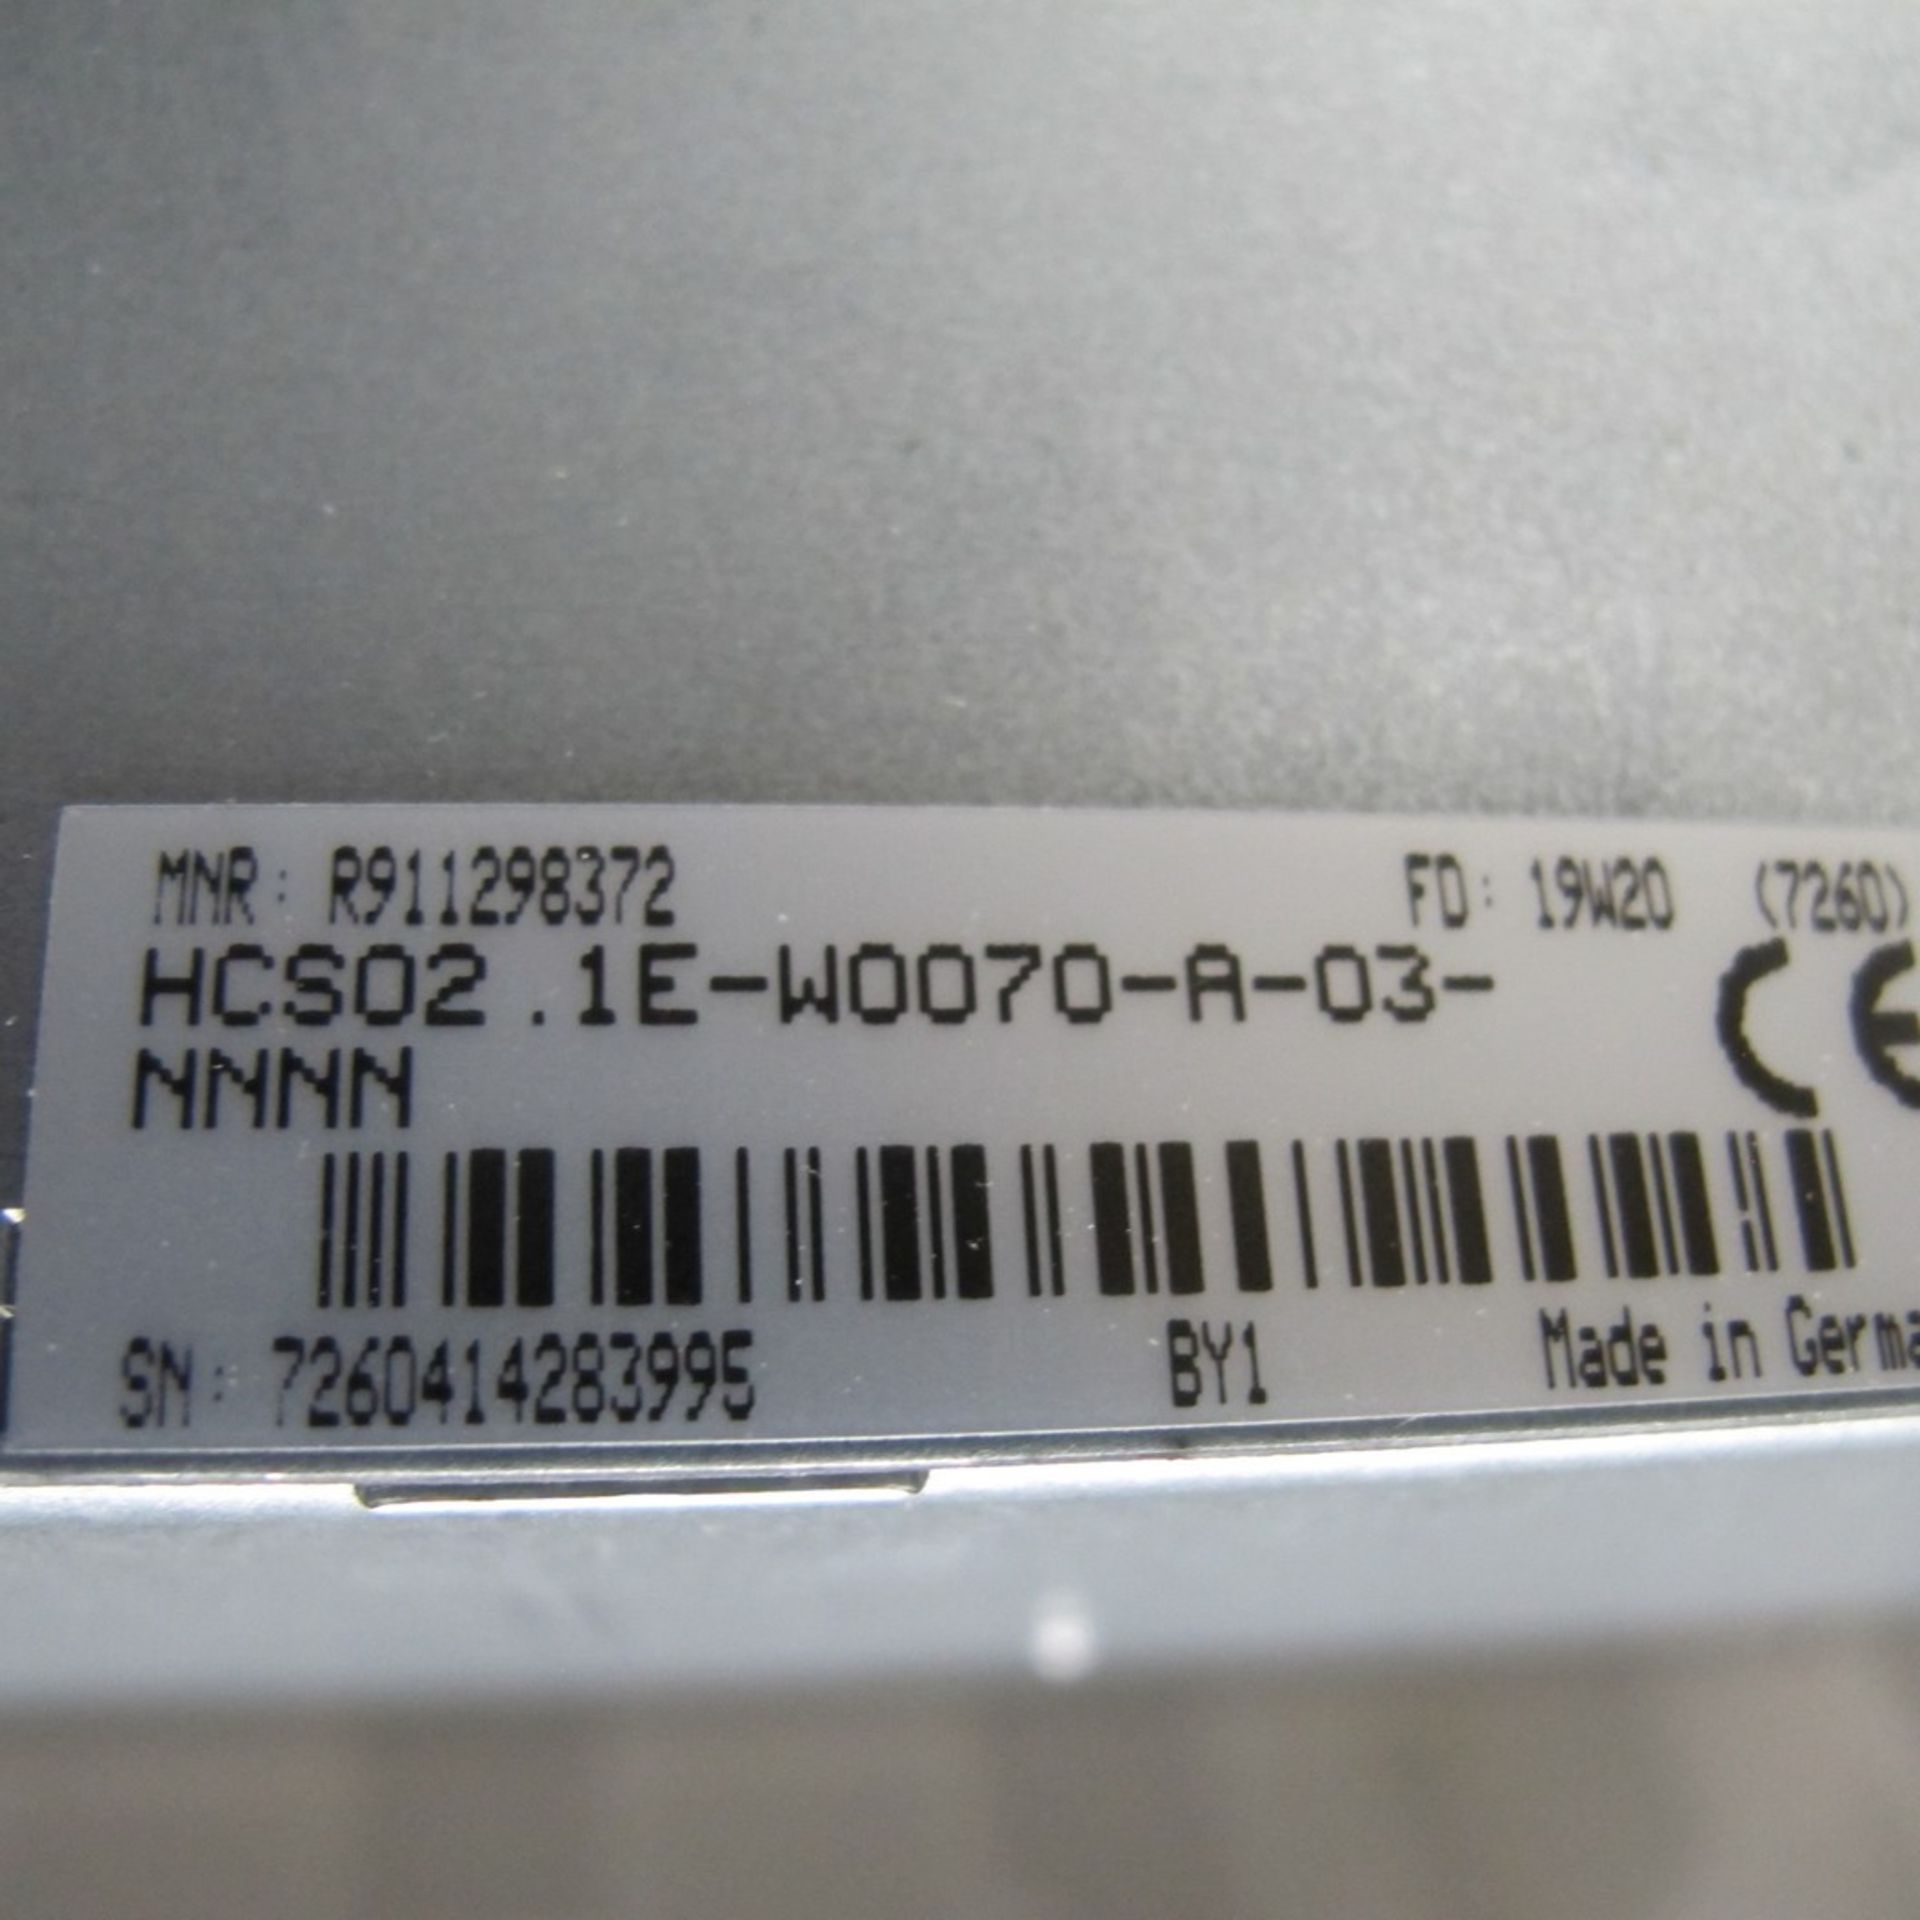 REXROTH INDRADRIVE C HC502.1E-W0070-A-03-NNNN (NORTH CENTER PLANT, UPPER FLOOR) - Image 3 of 3